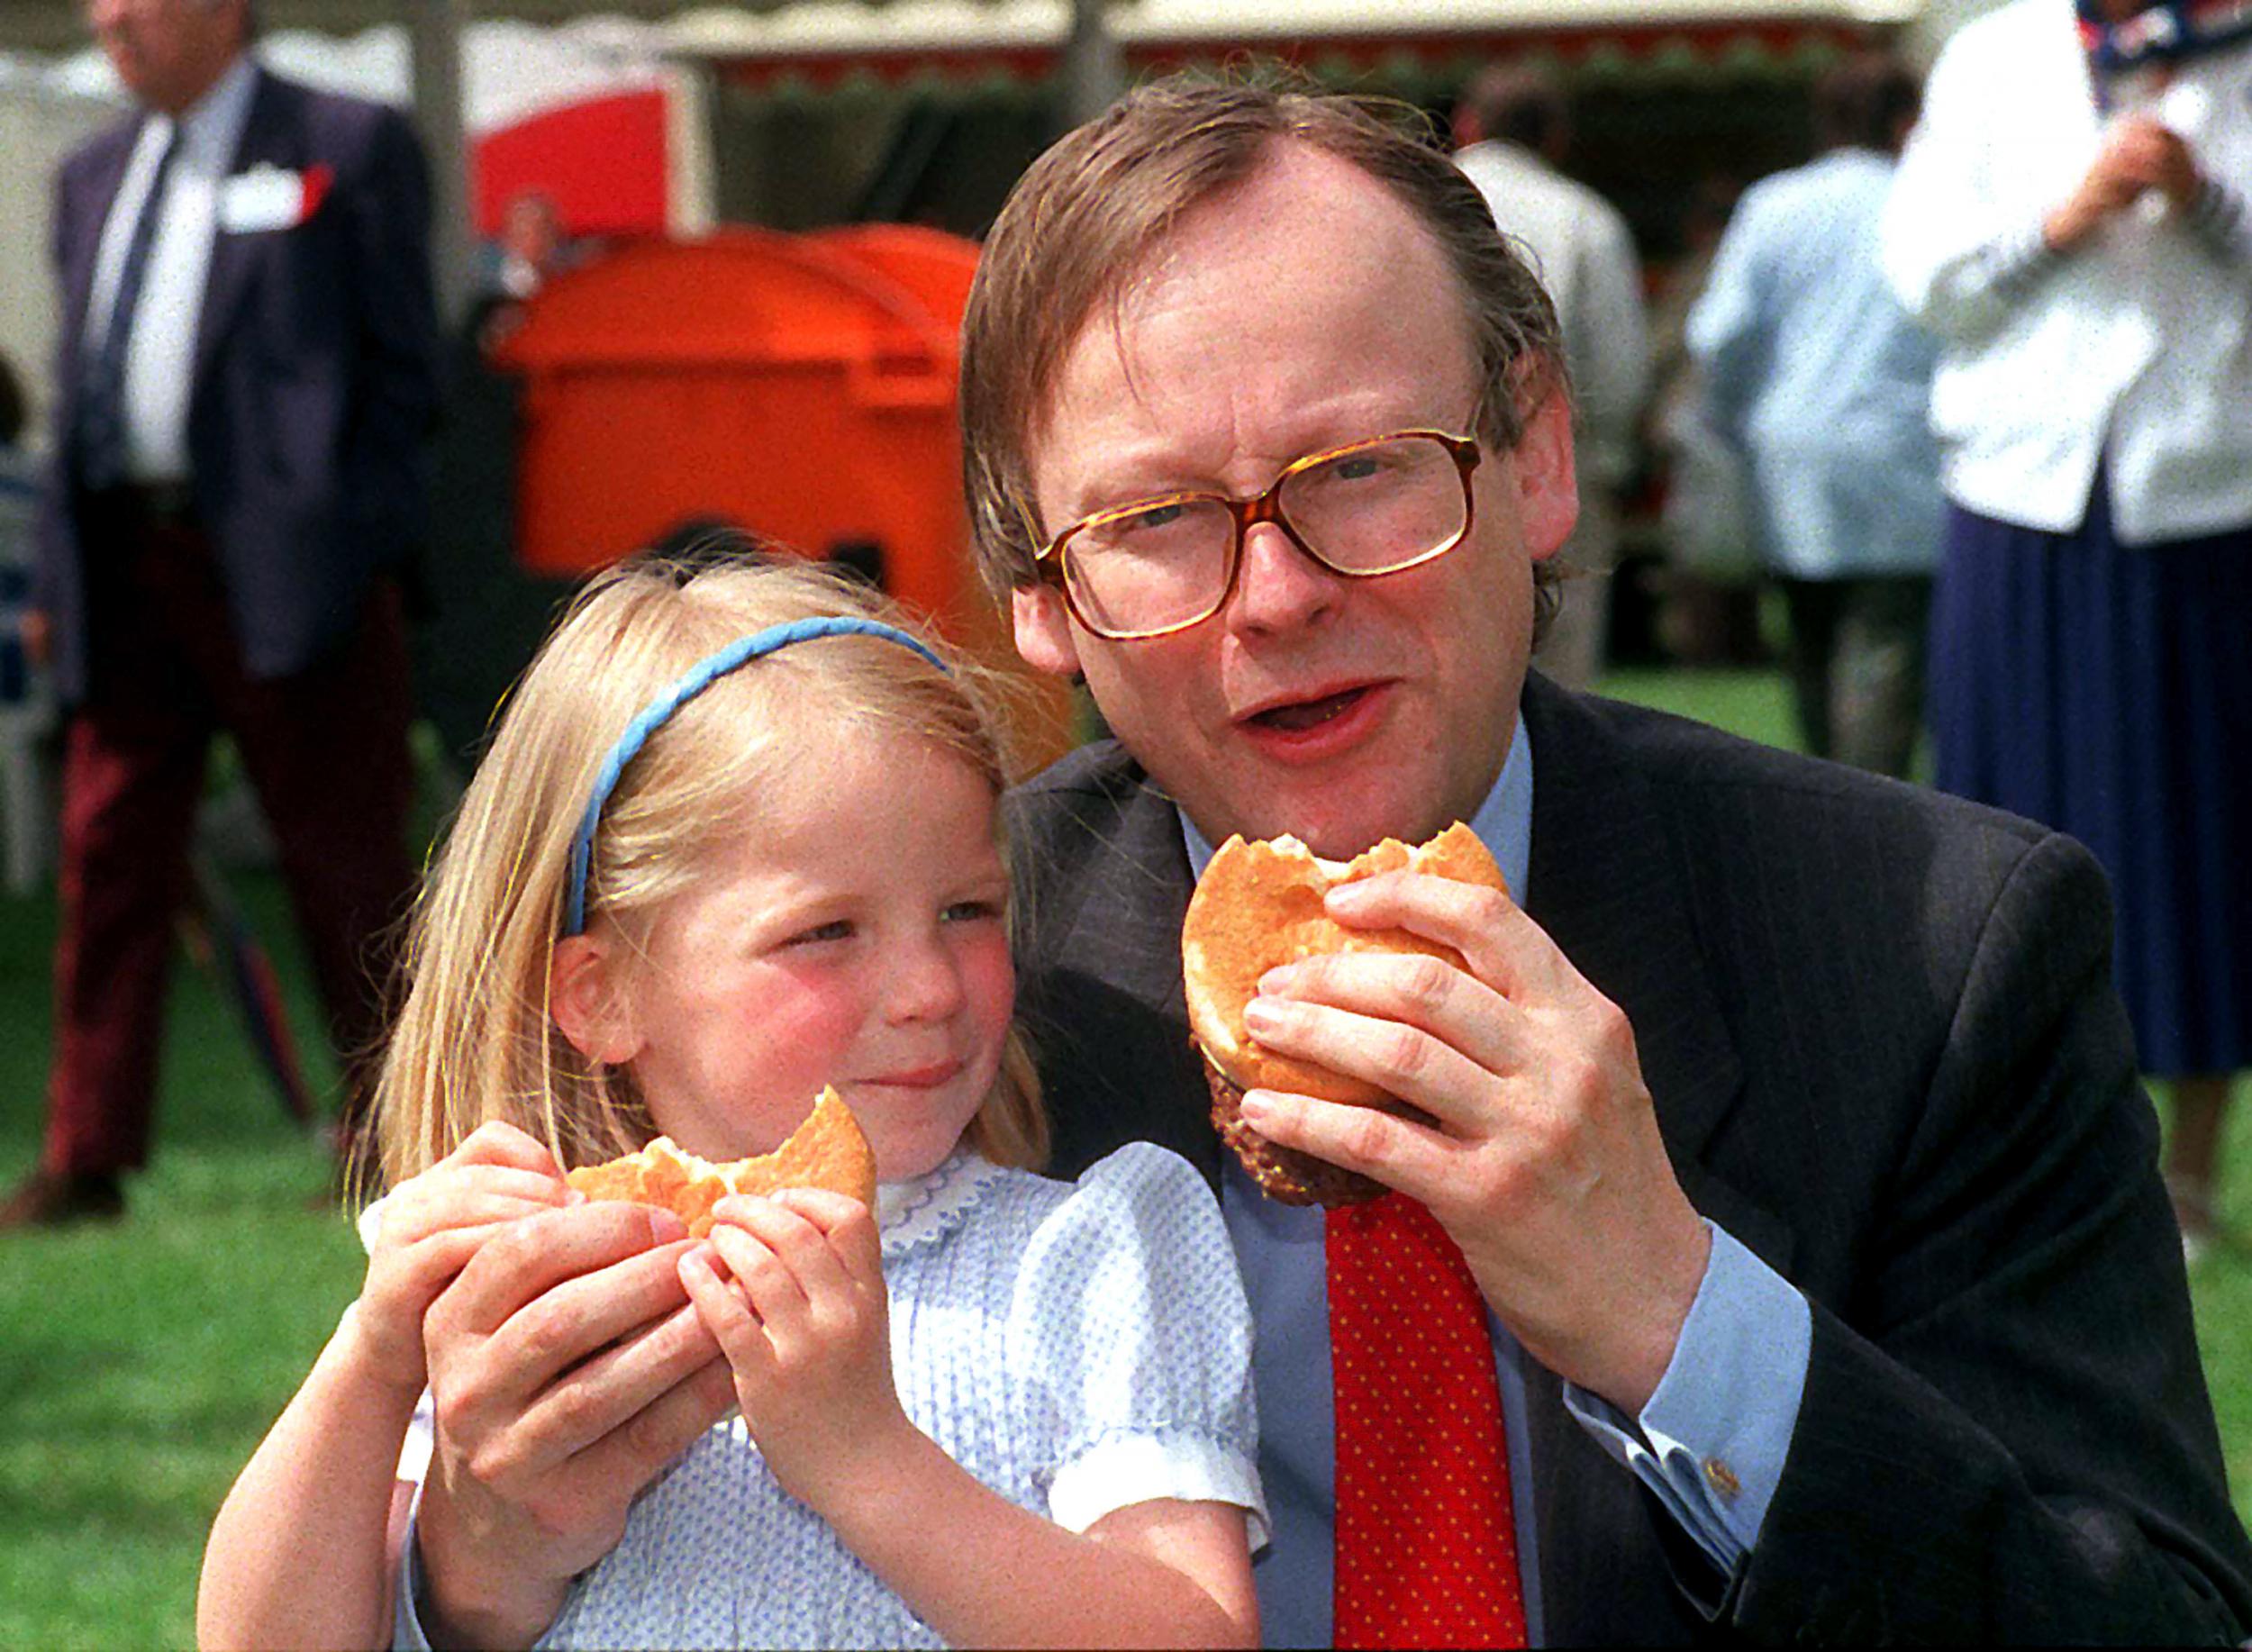 What’s the beef?: Agriculture minister John Gummer fed his daughter a beefburger in front of the press, in May 1990, to show there was nothing to fear from mad cow disease